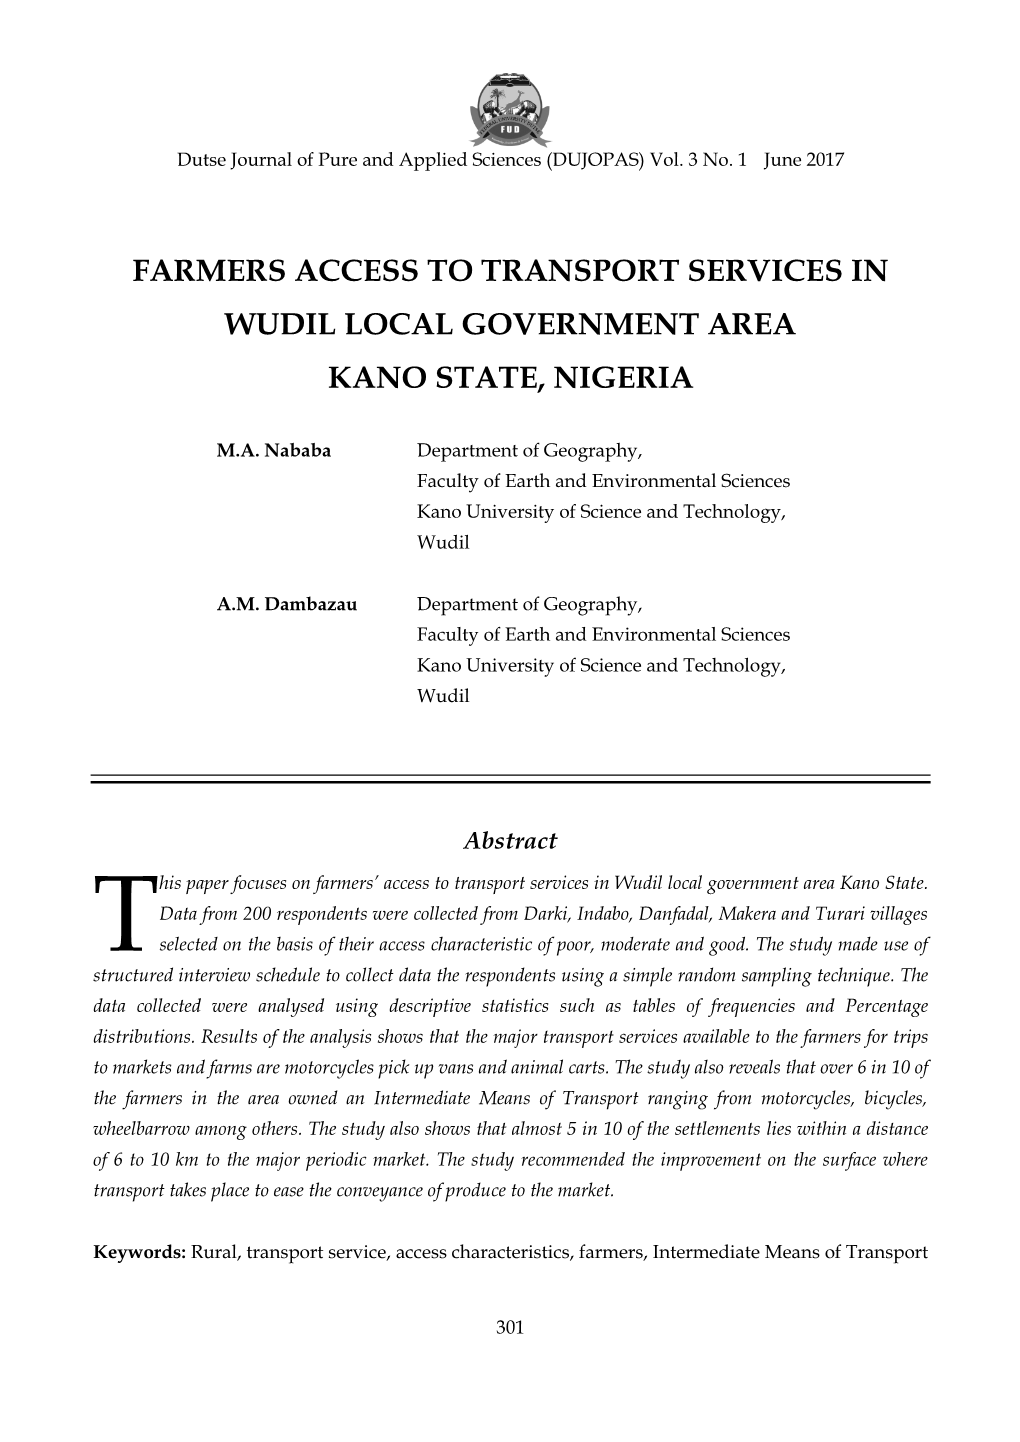 Farmers Access to Transport Services in Wudil Local Government Area Kano State Nigeria